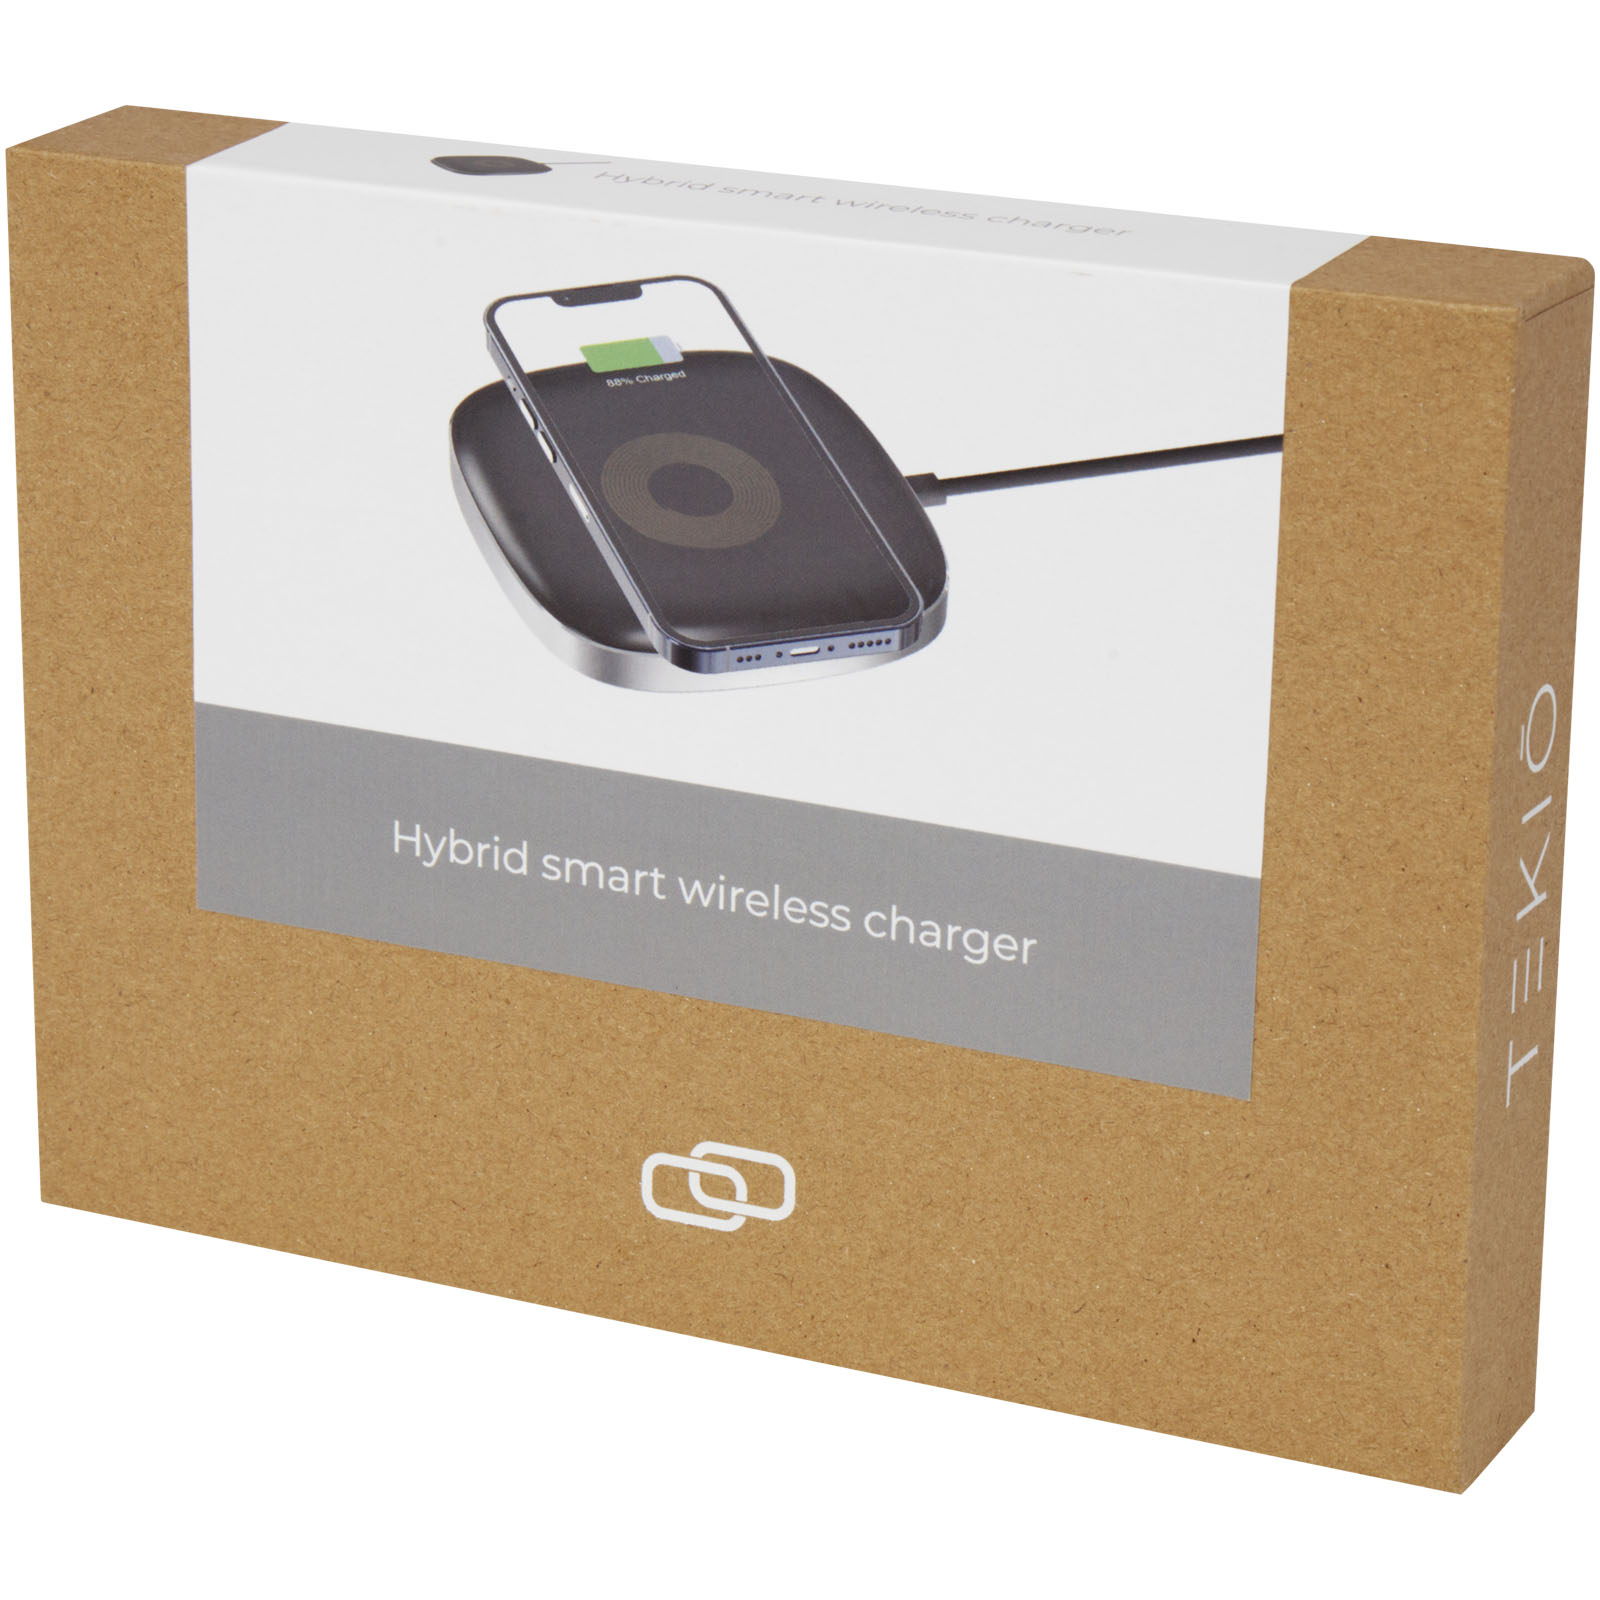 Advertising Wireless Charging - Hybrid smart wireless charger - 1